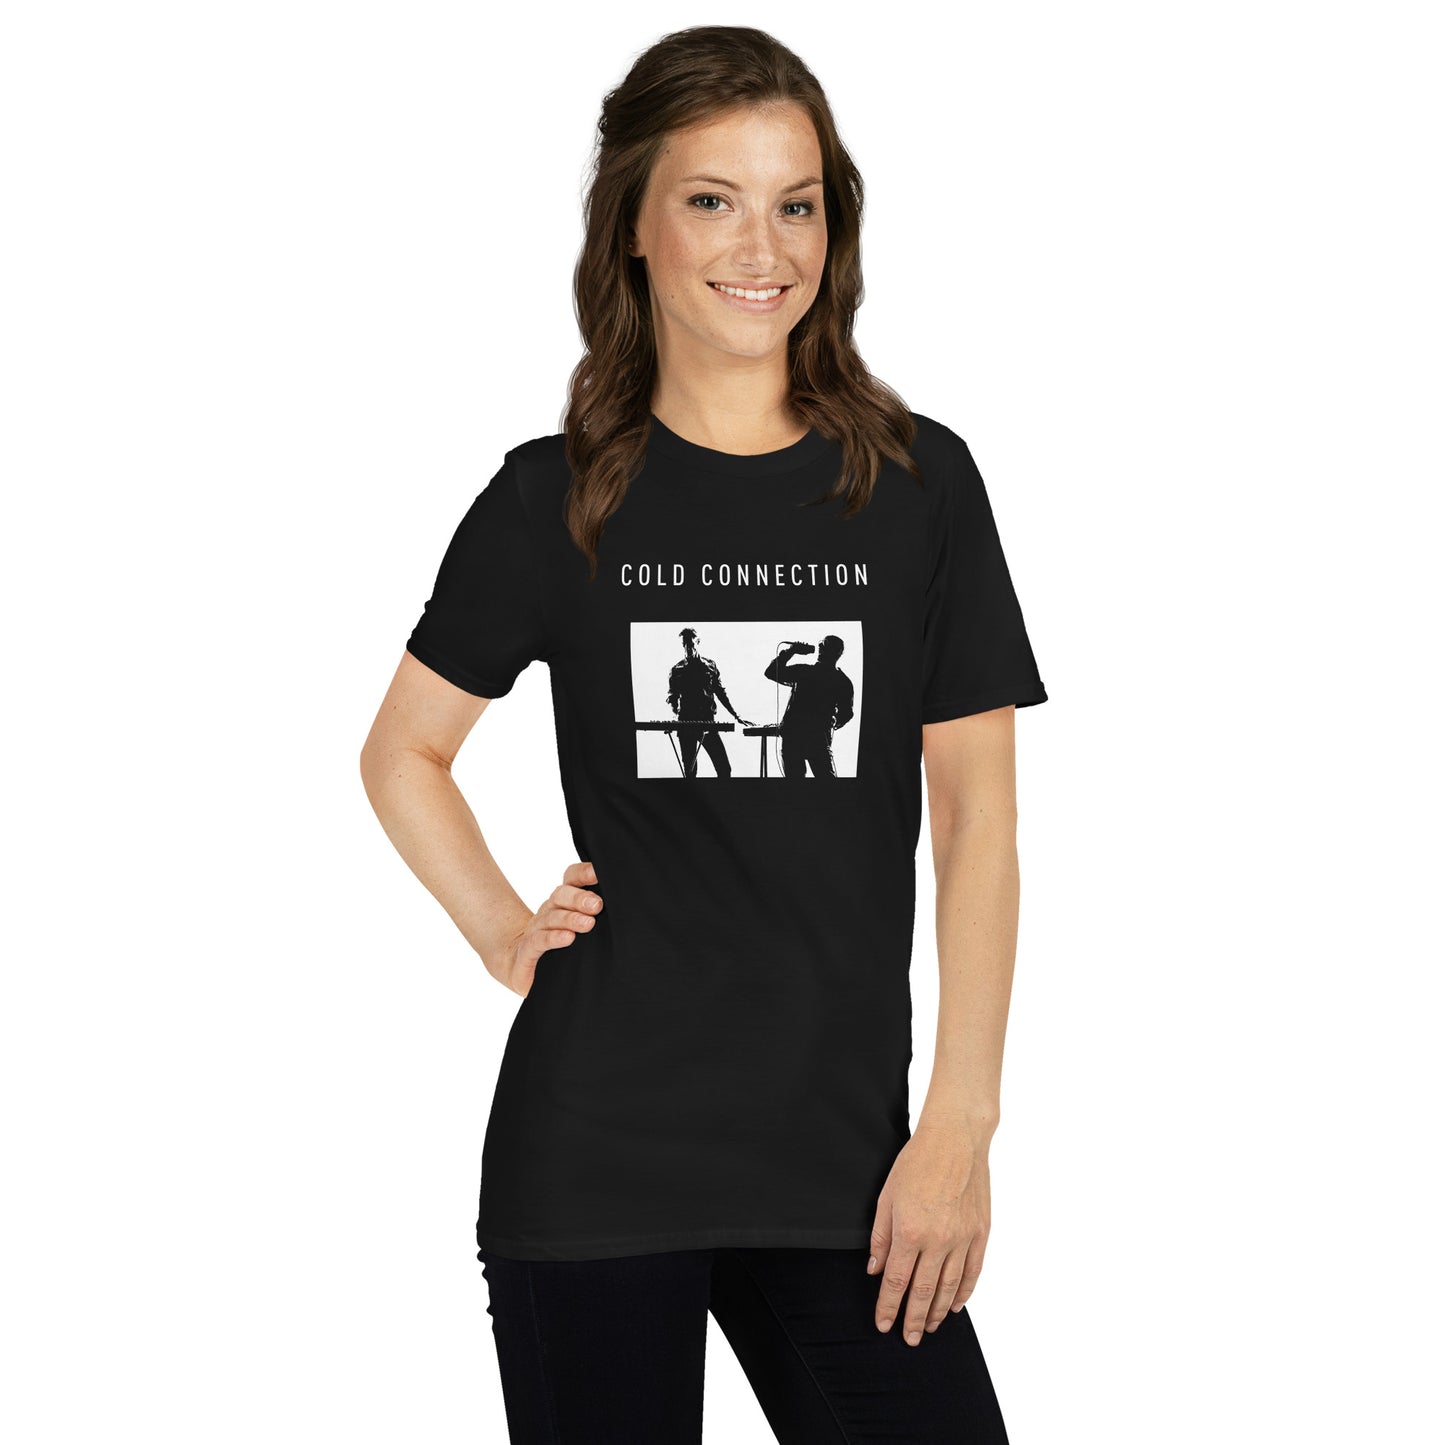 Cold Connection, official photo, Short-Sleeve Unisex T-Shirt